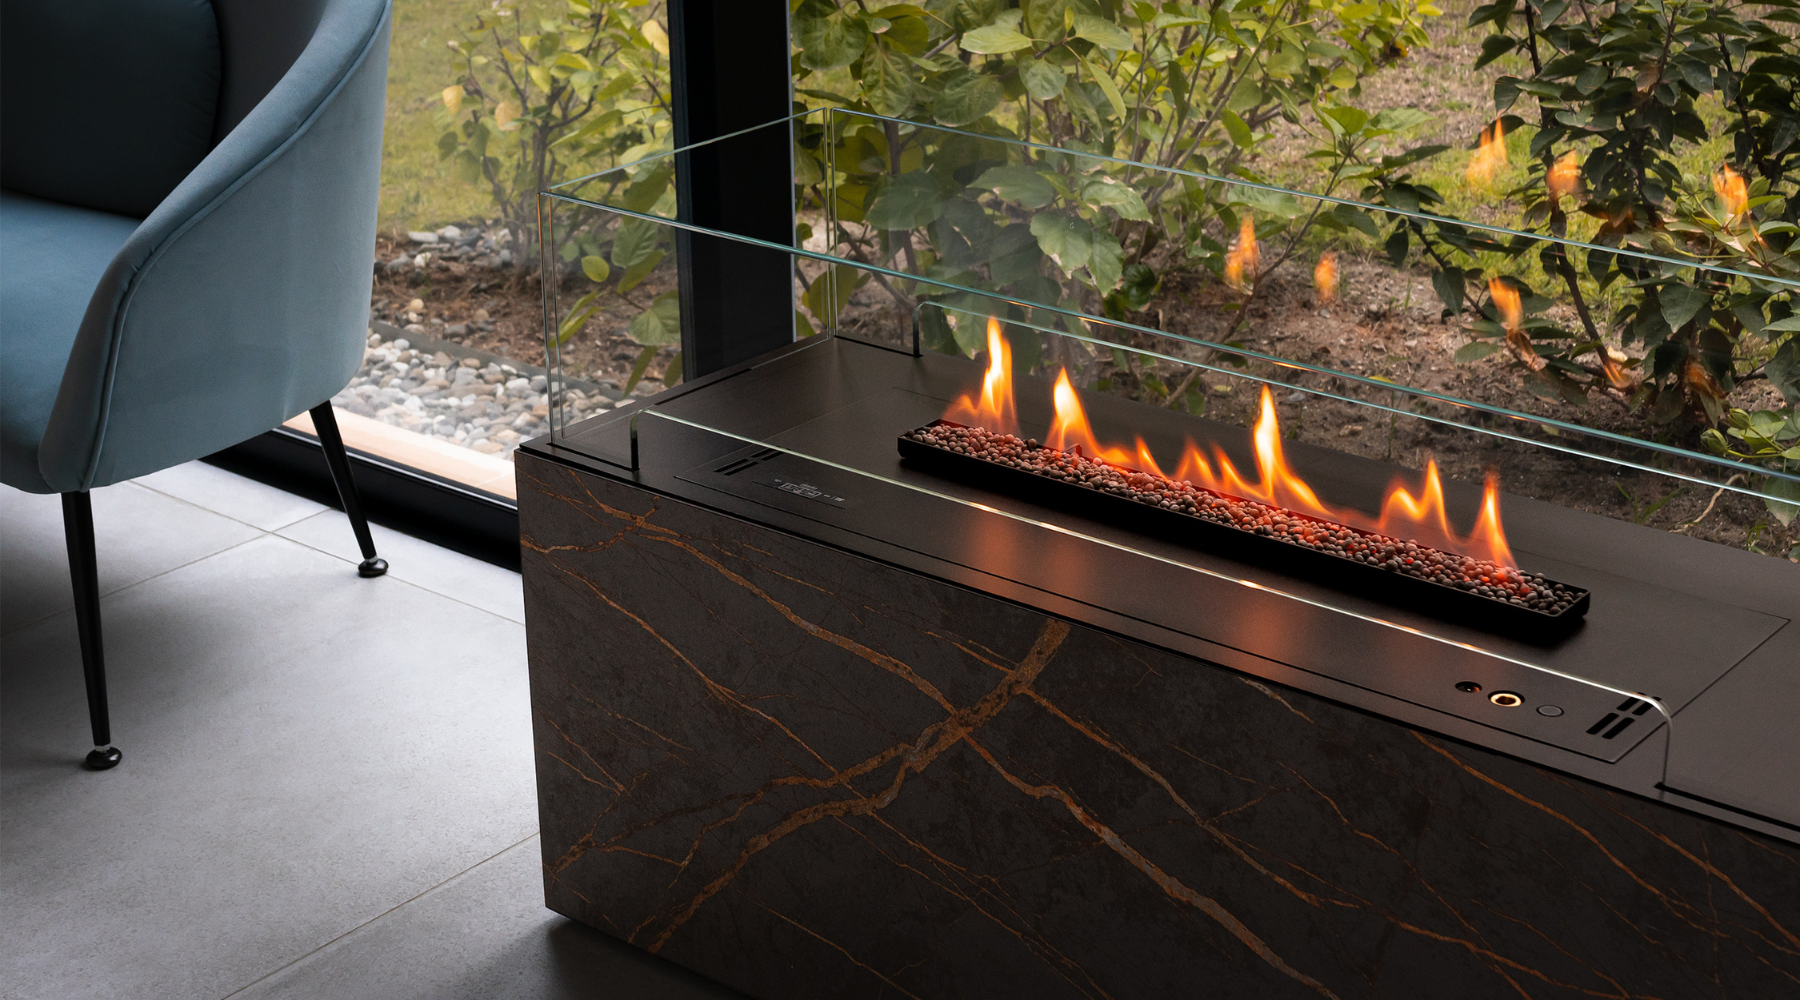 Are Ventless Fireplaces Safe?